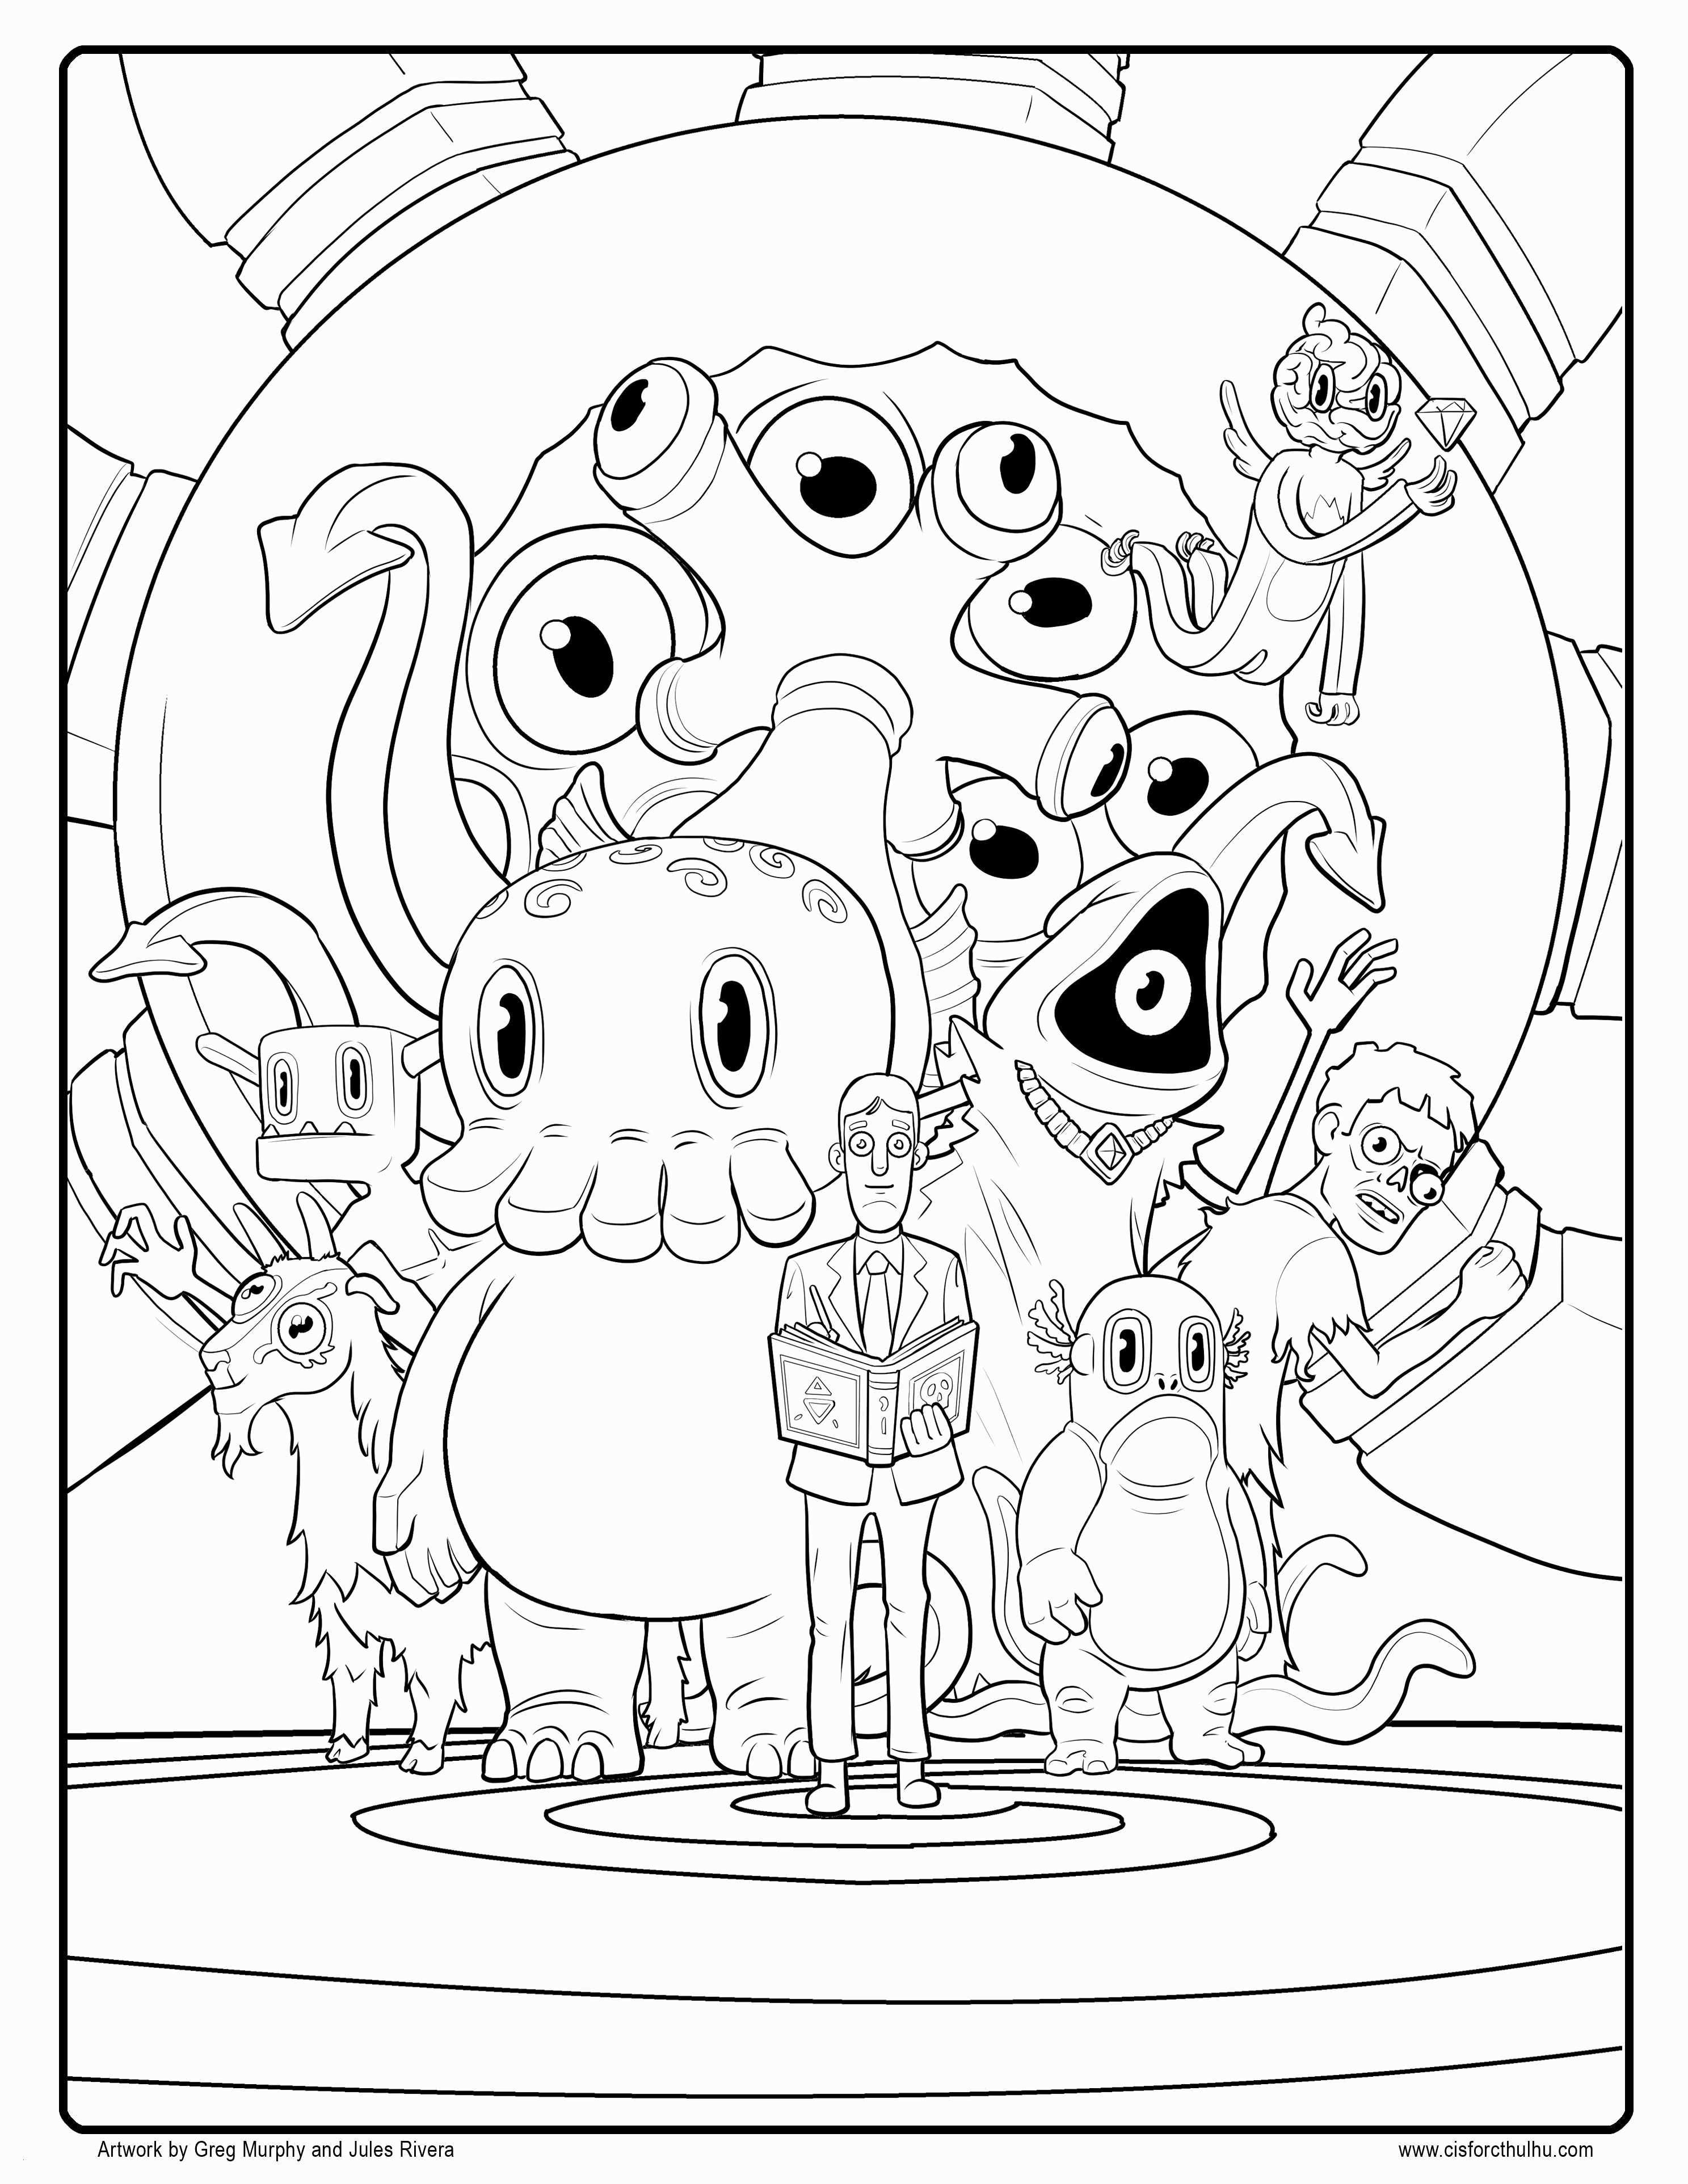 Purim Coloring Page Purim Coloring Pages Best Of Bat Color Page Coloring Pages Coloring